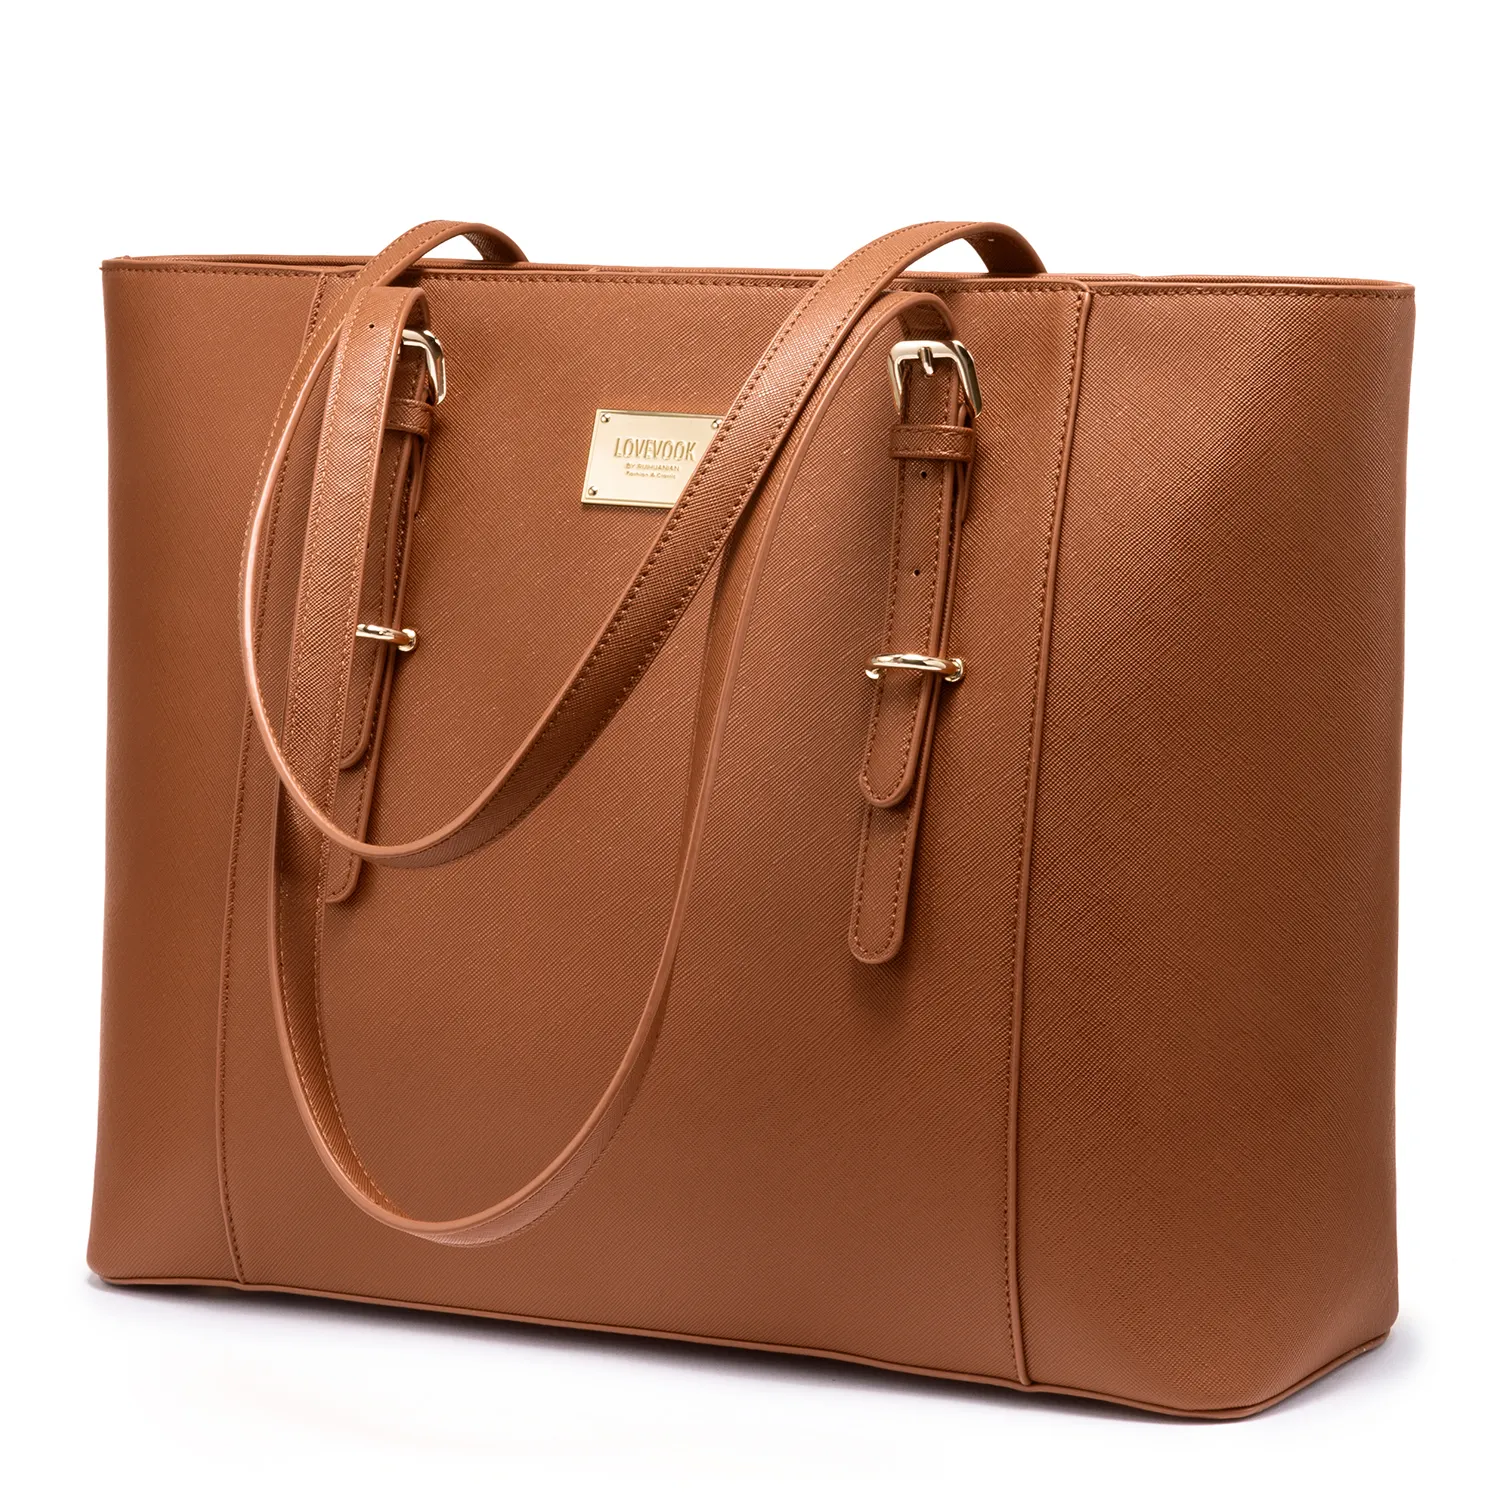 LOVEVOOK 2024 15.6 inch Large Woman Leather Business Computer Handbag Bag Ladies Office Shoulder Laptop Tote Hand Bags for Women